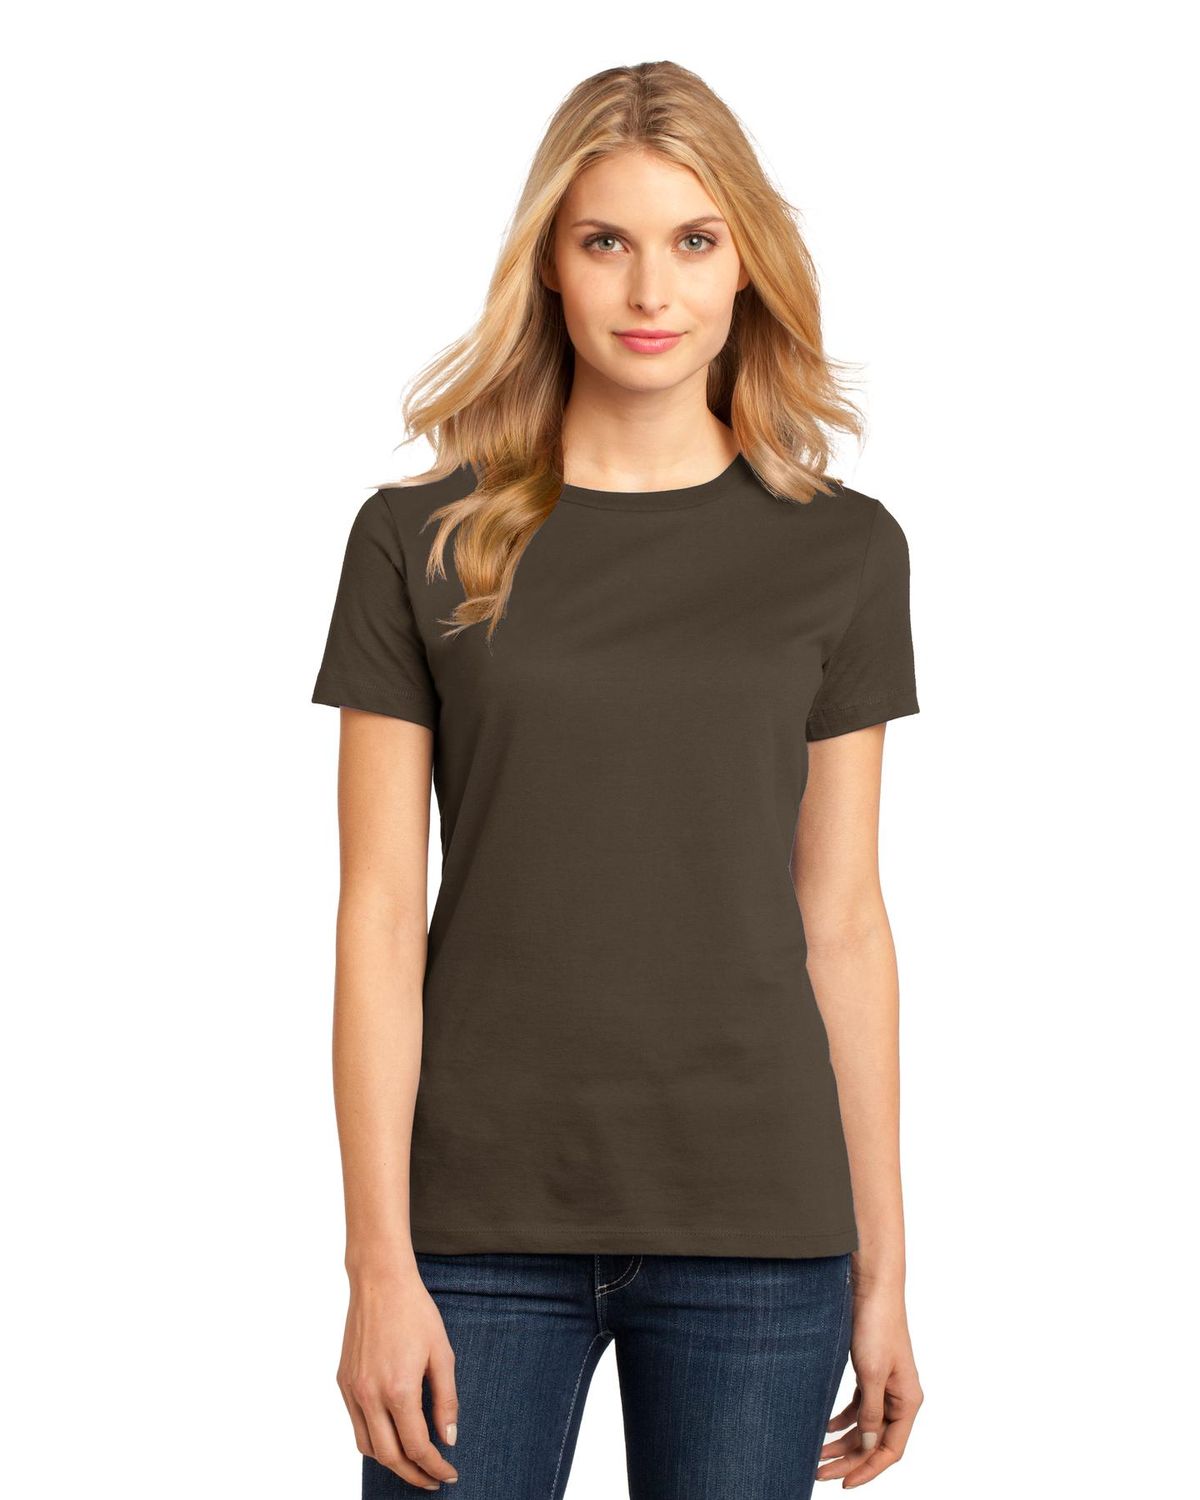 'District DM104L Ladies Perfect Weight Crew T-Shirt'